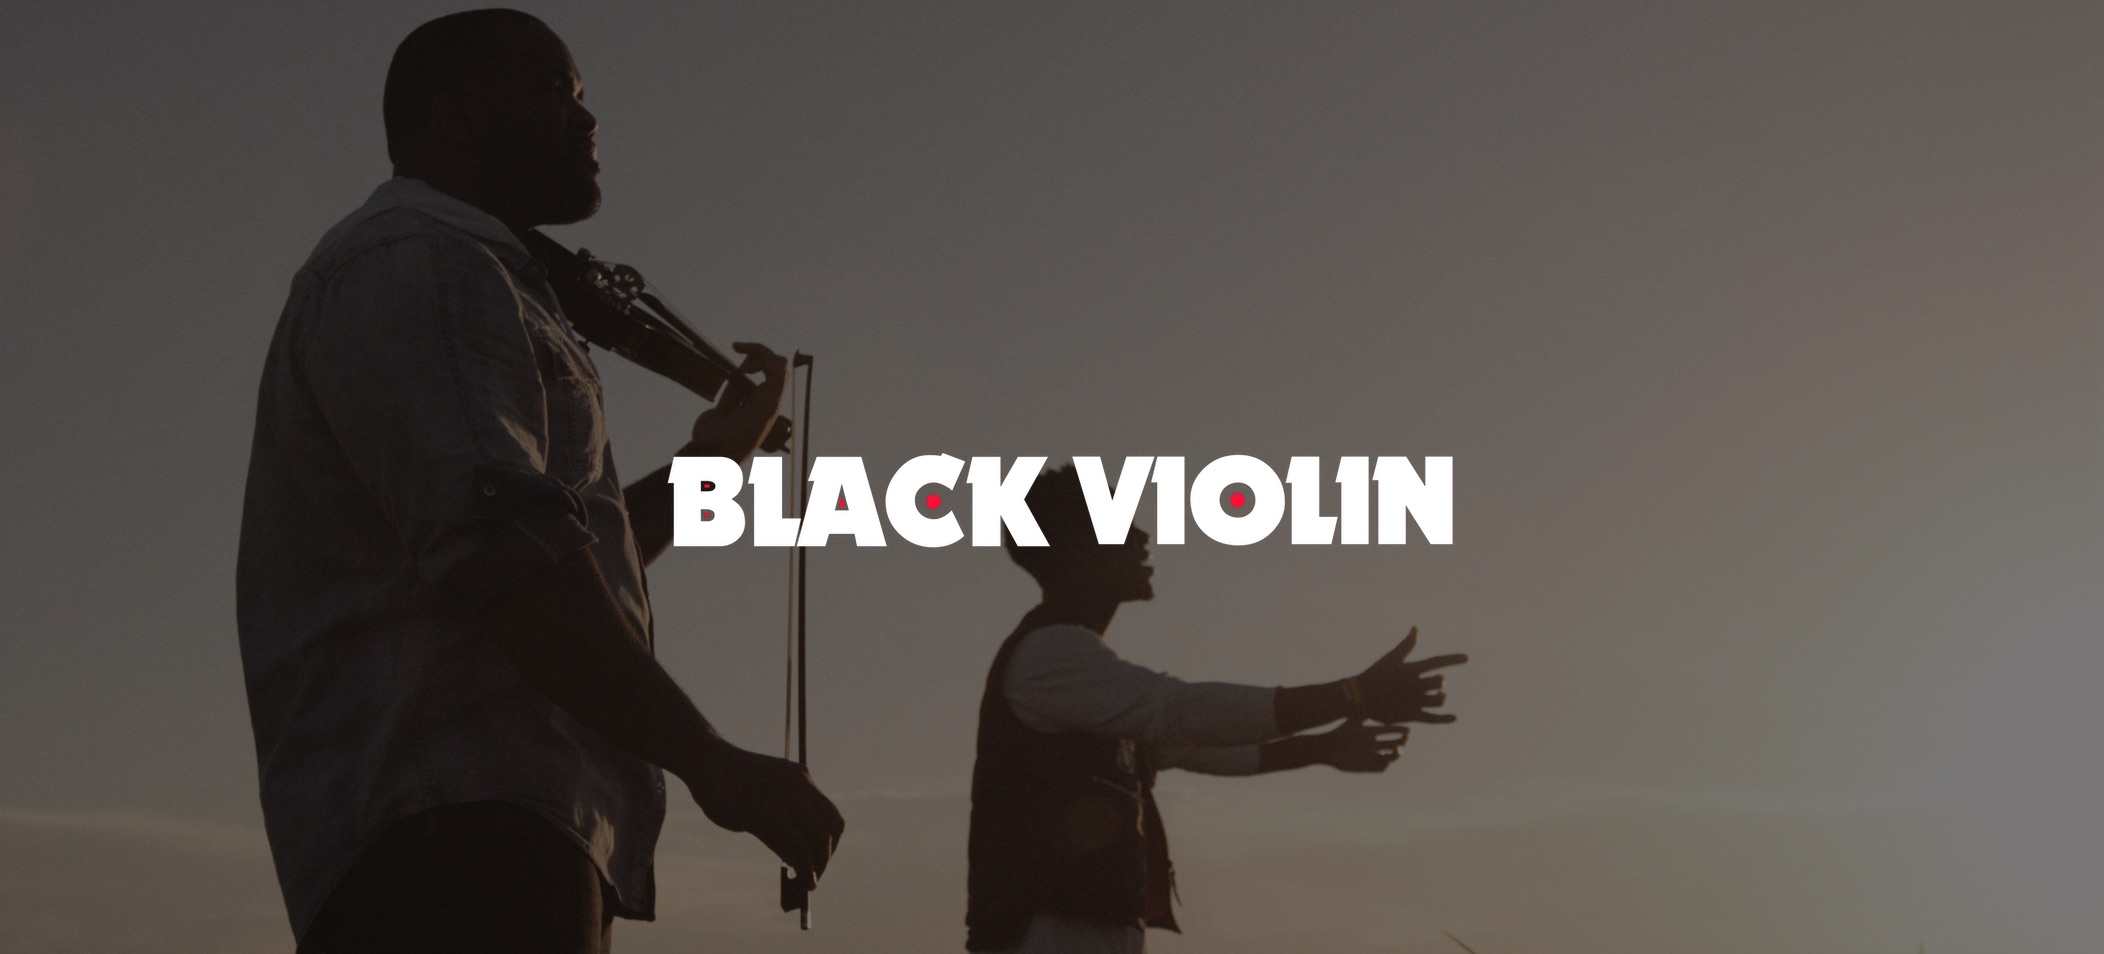 Impossible is Possible Music Video, Black Violin